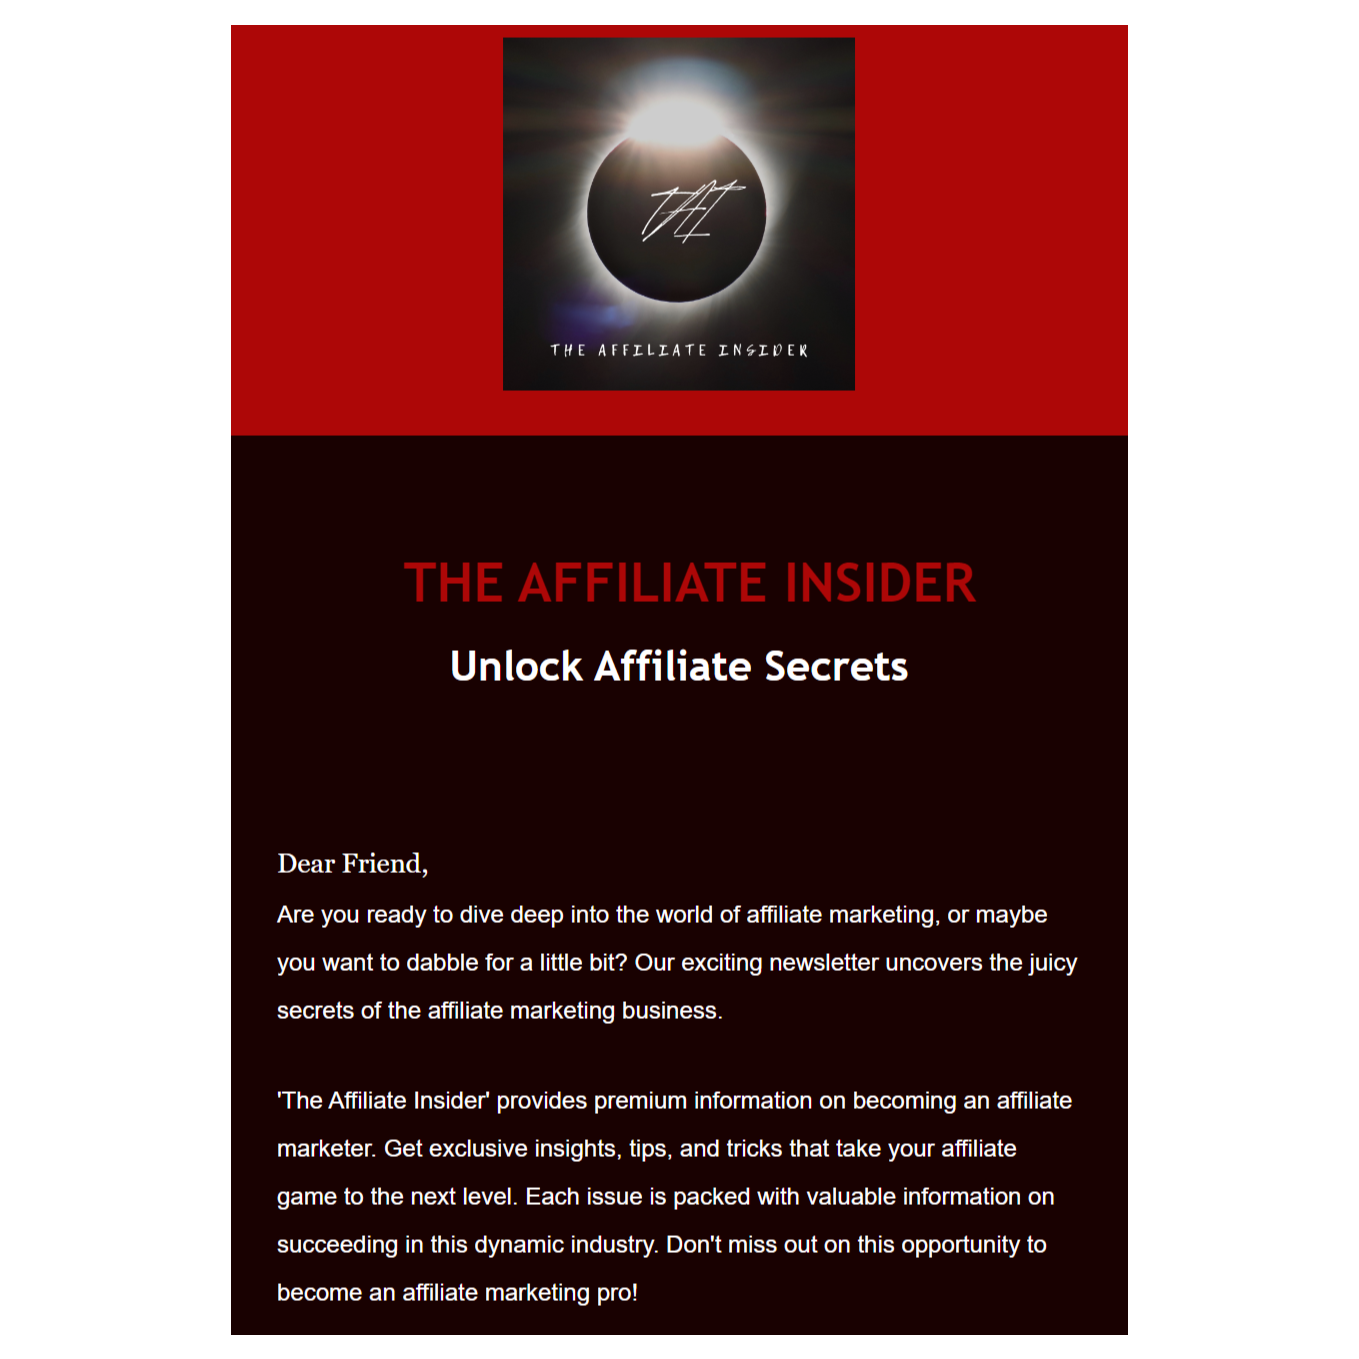 The Affiliate Insider